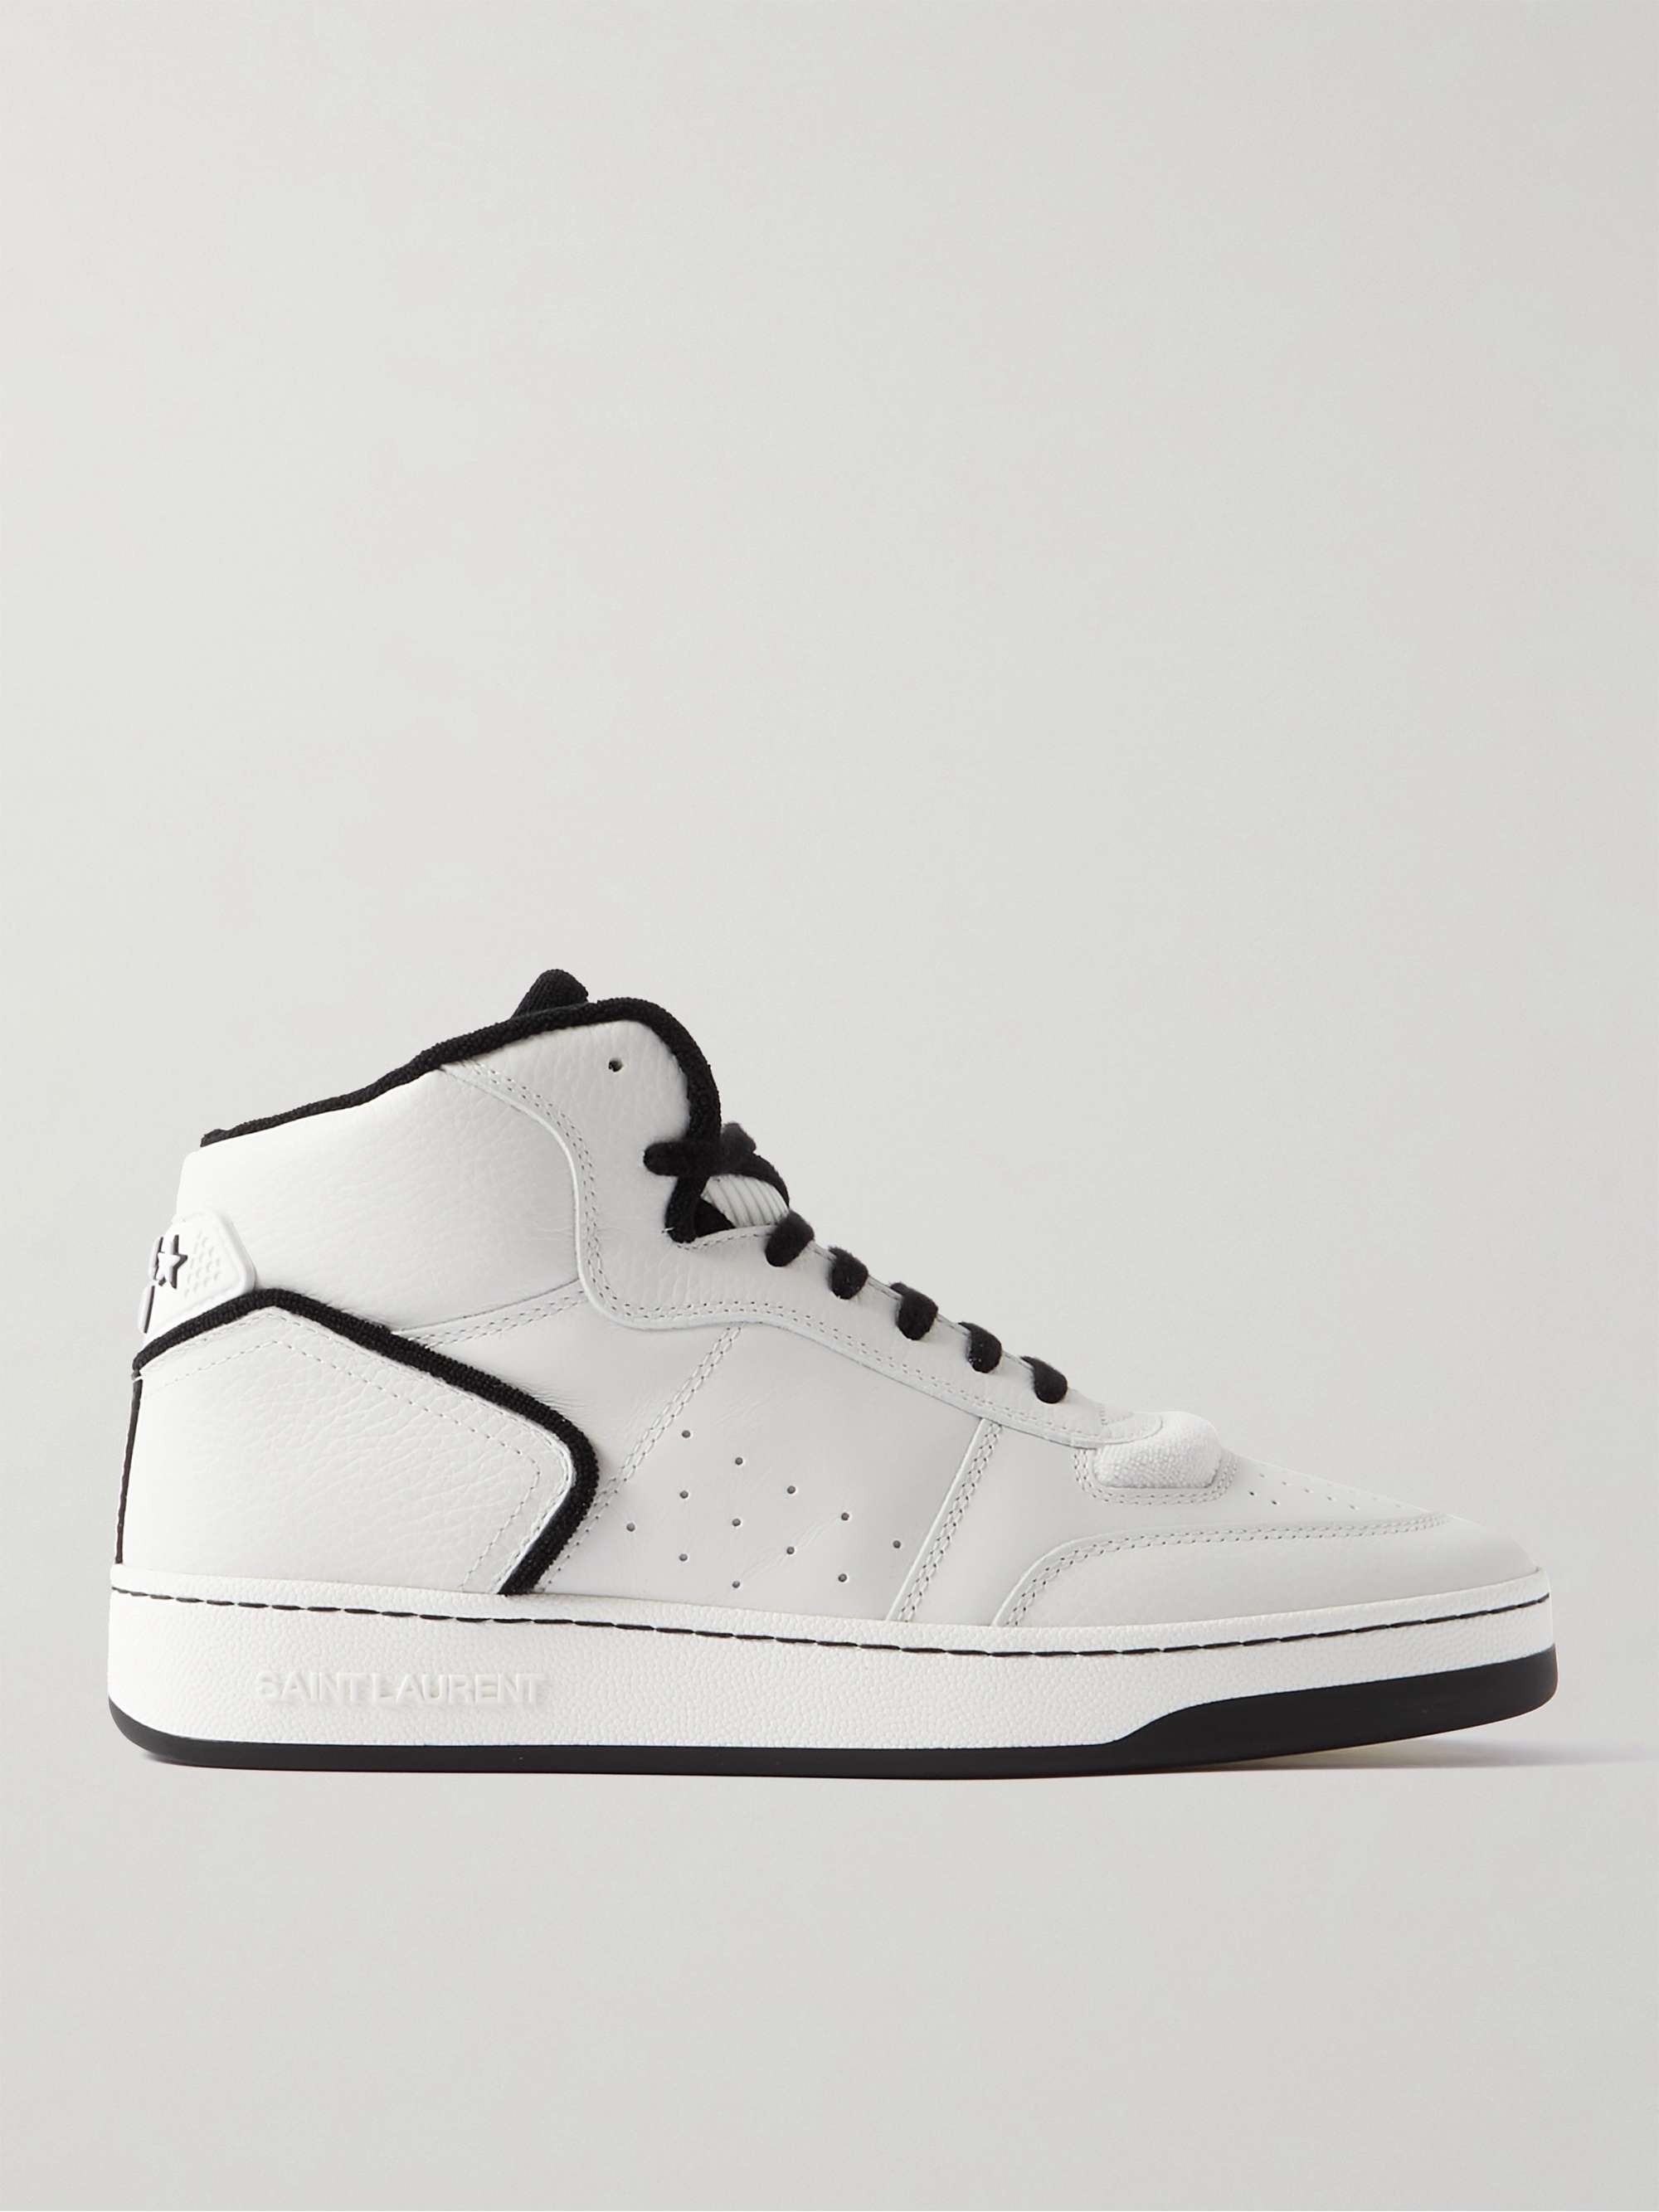 SAINT LAURENT SL/80 Perforated Leather High-Top Sneakers for Men | MR PORTER